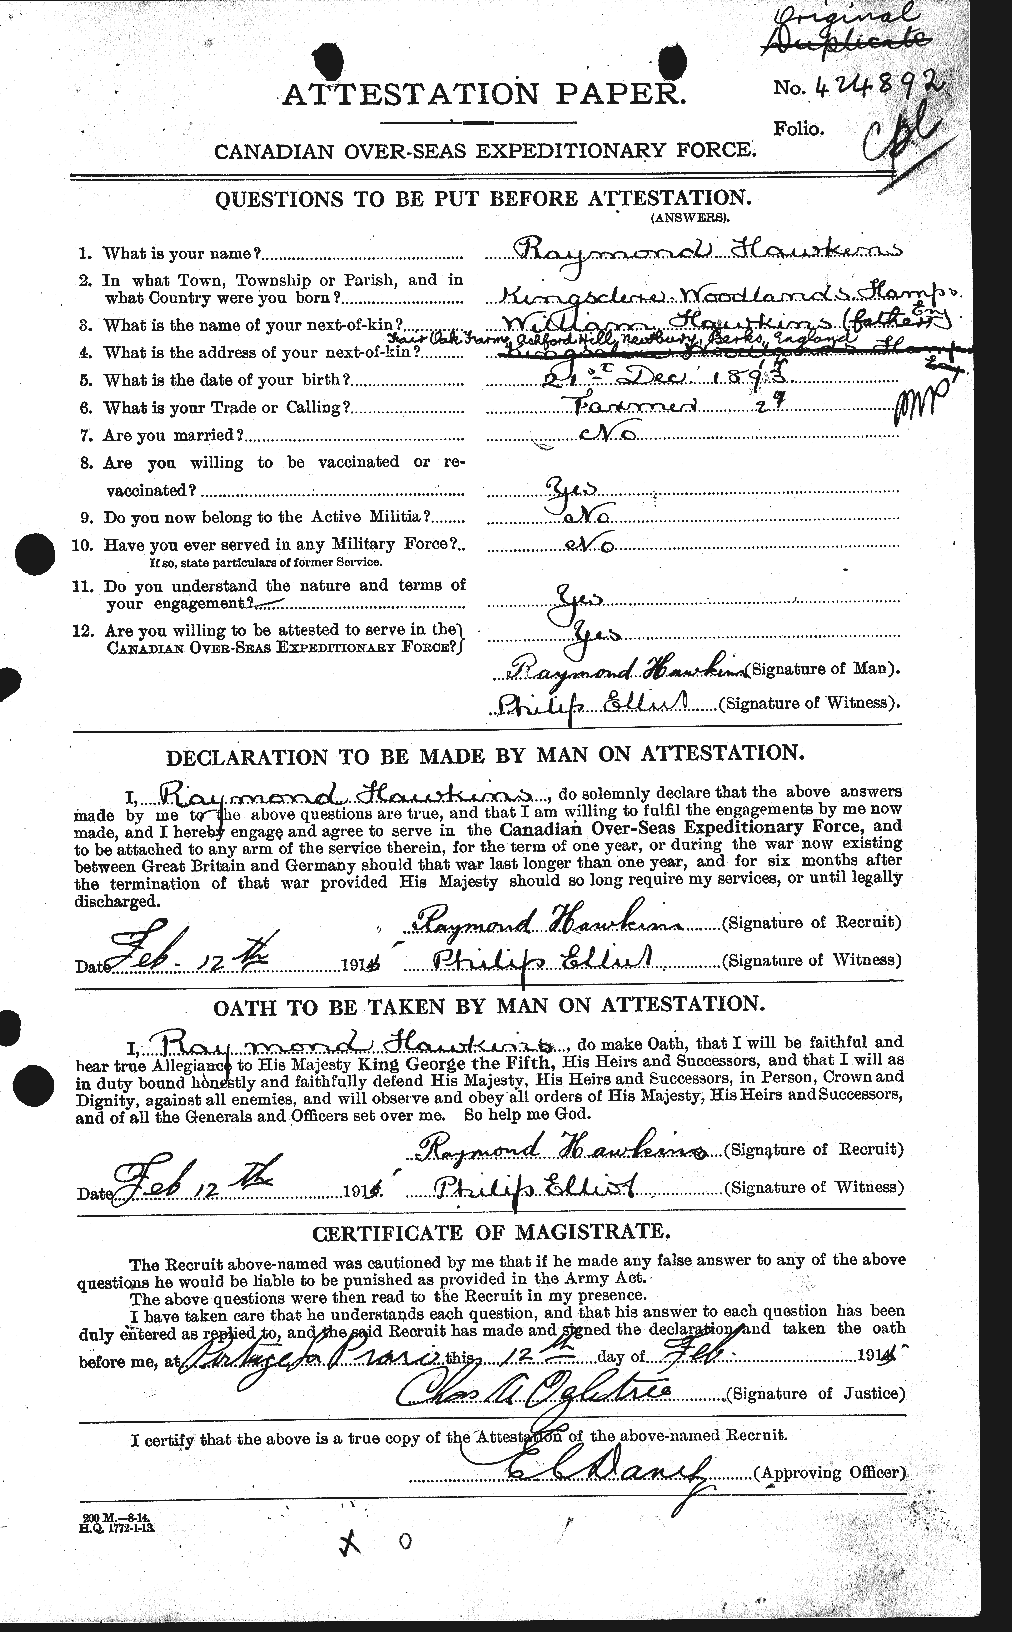 Personnel Records of the First World War - CEF 387223a